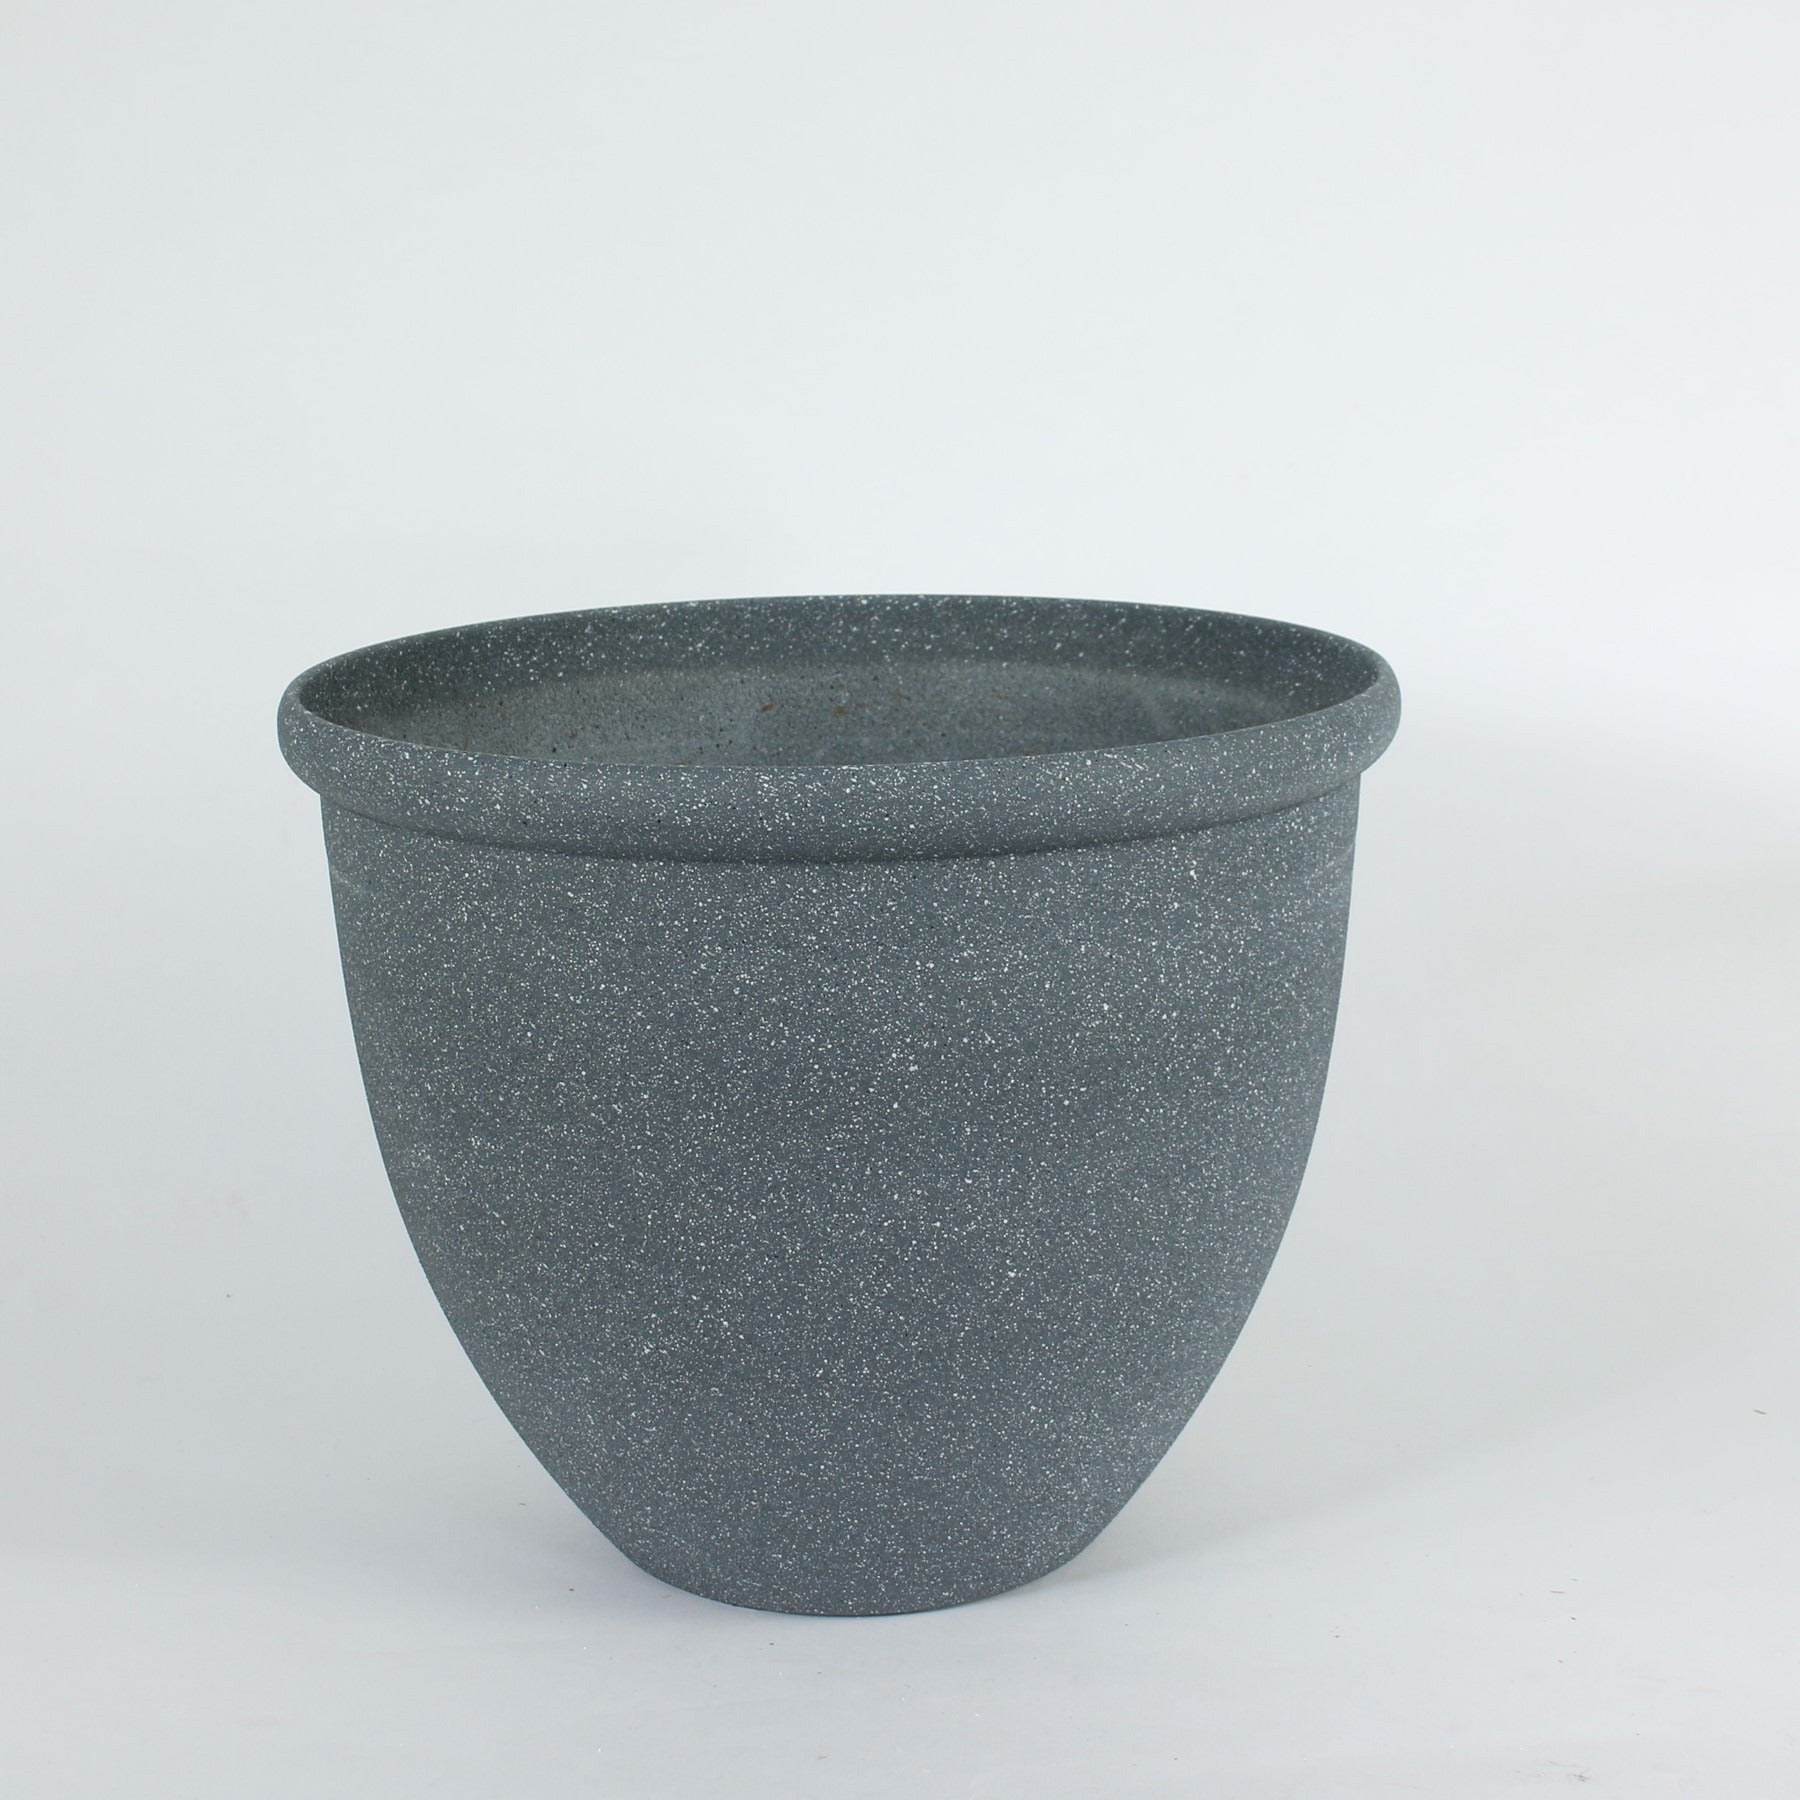 View 12 Inch Plastic Stone Effect Planter information